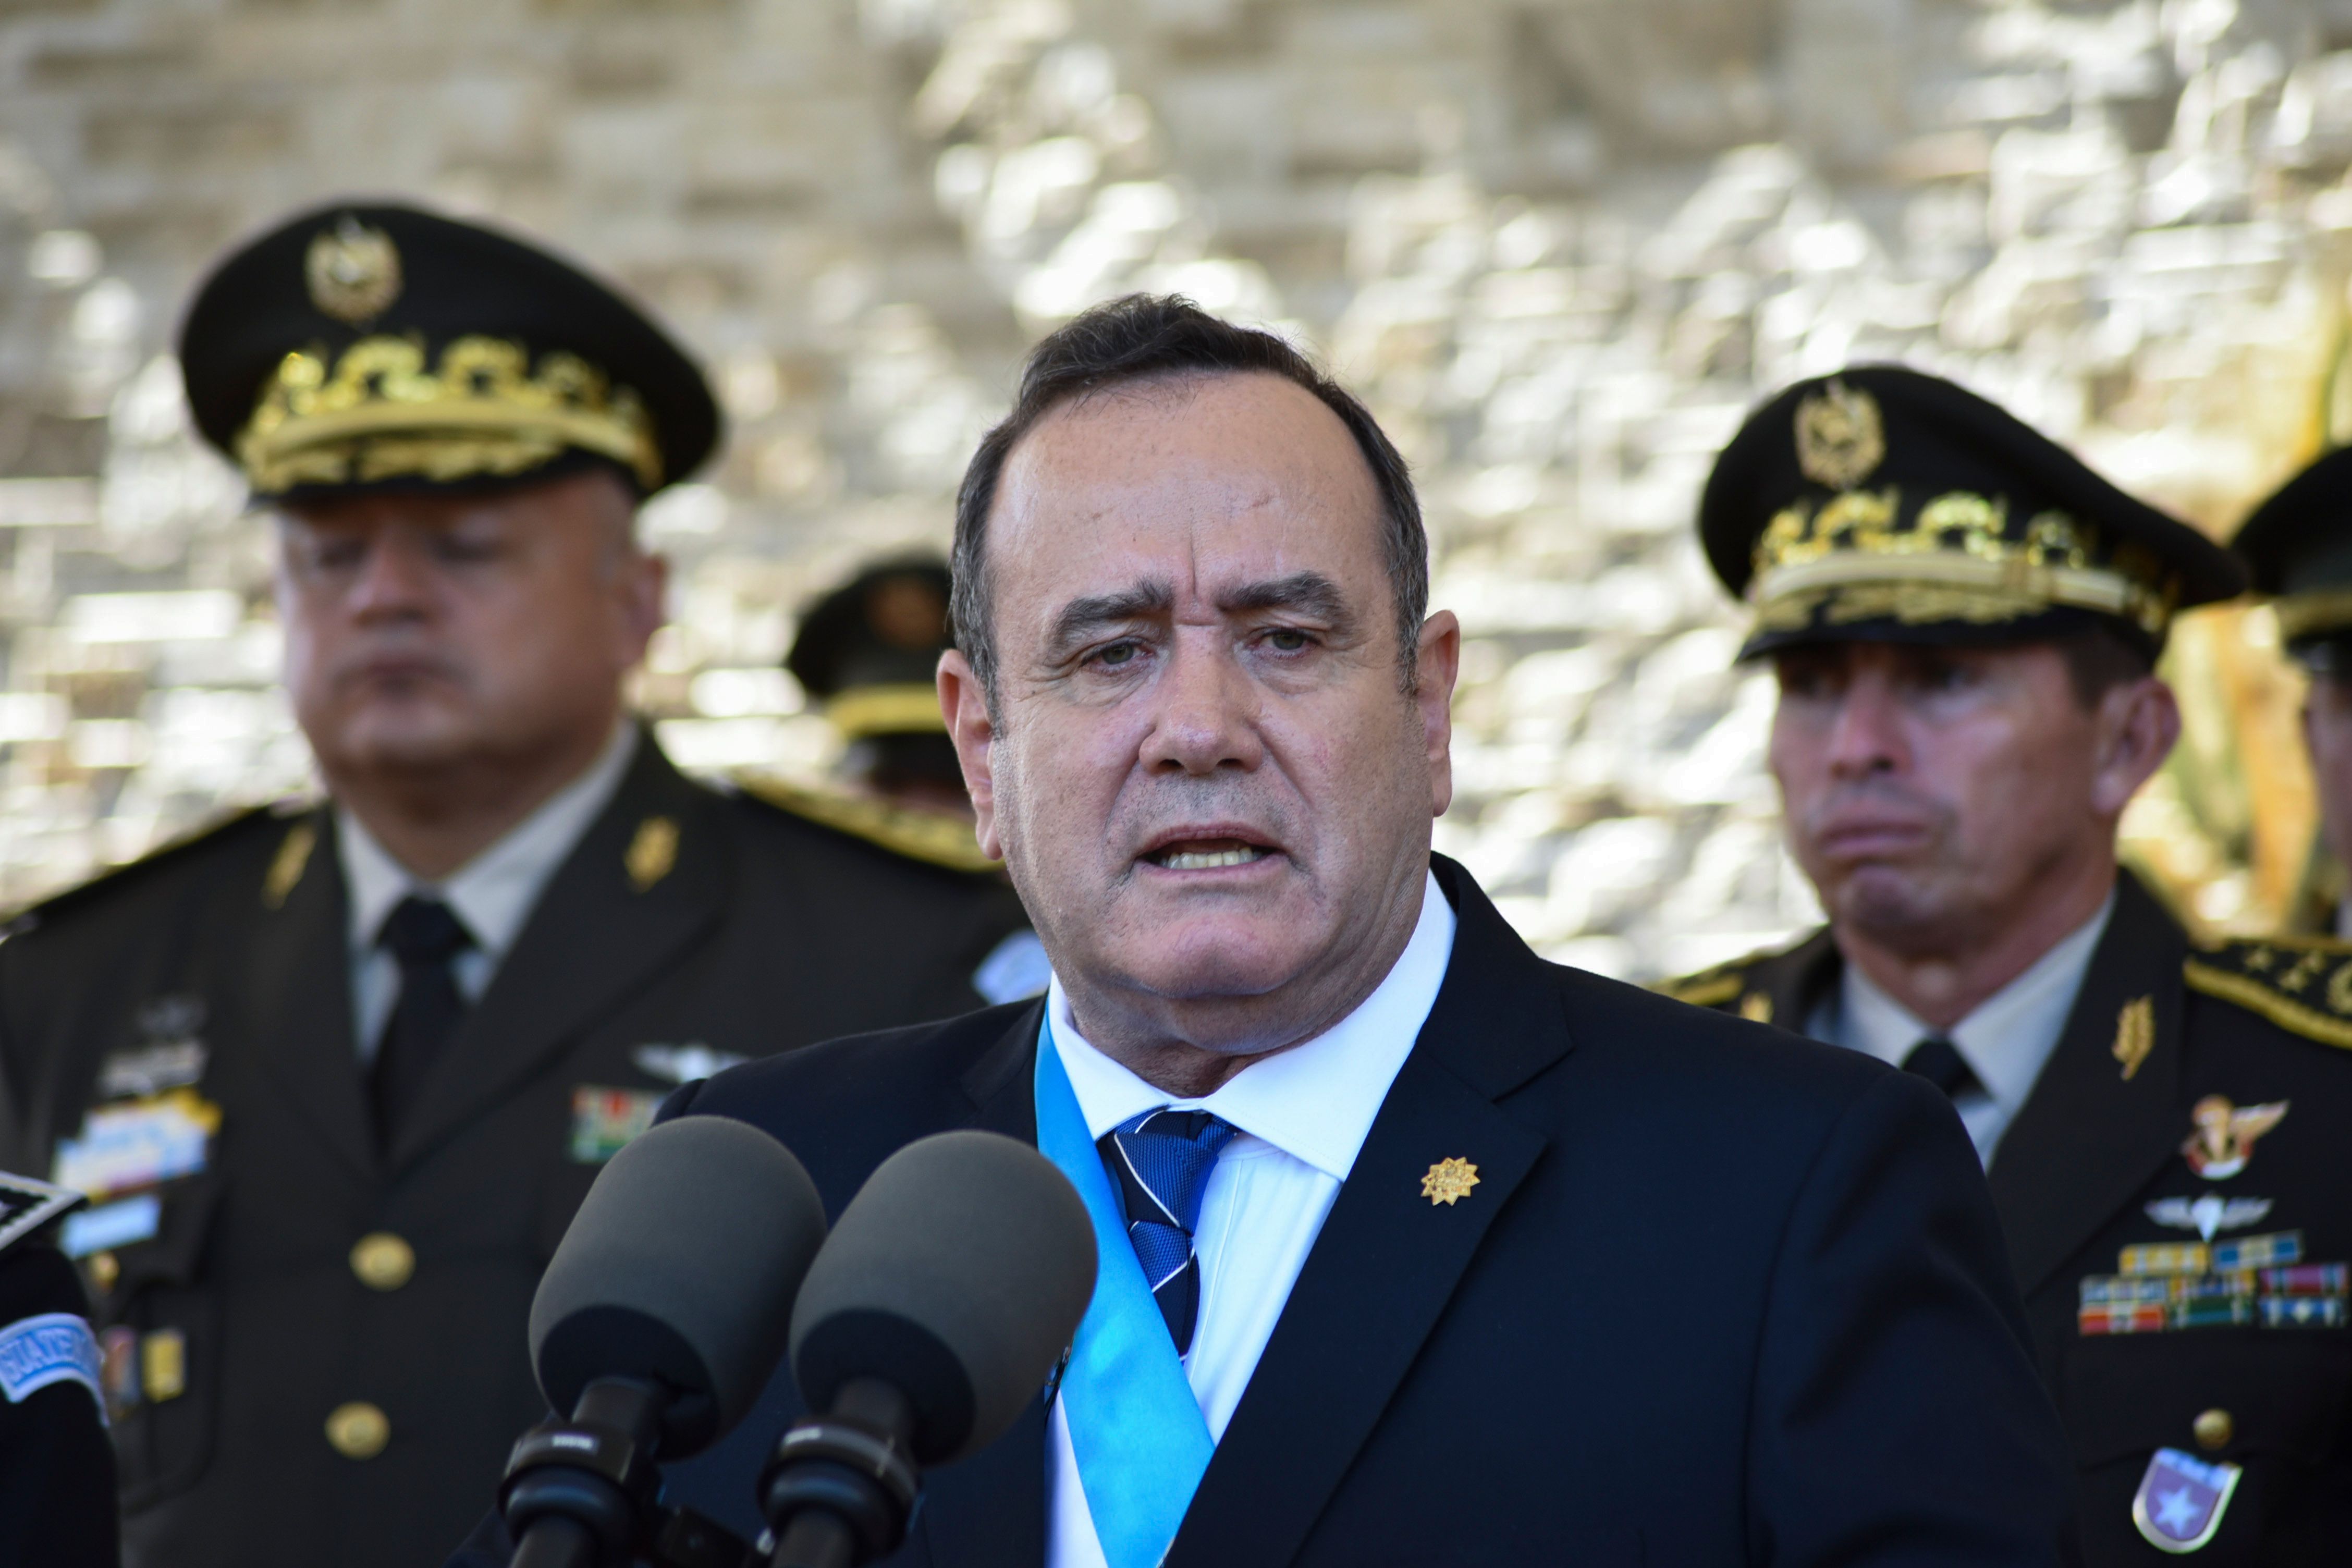 Guatemalan President and Army Commander in Chief Alejandro Giammattei speaks during a military ceremony in Guatemala City, on January 15, 2020. (Photo by ORLANDO ESTRADA / AFP)